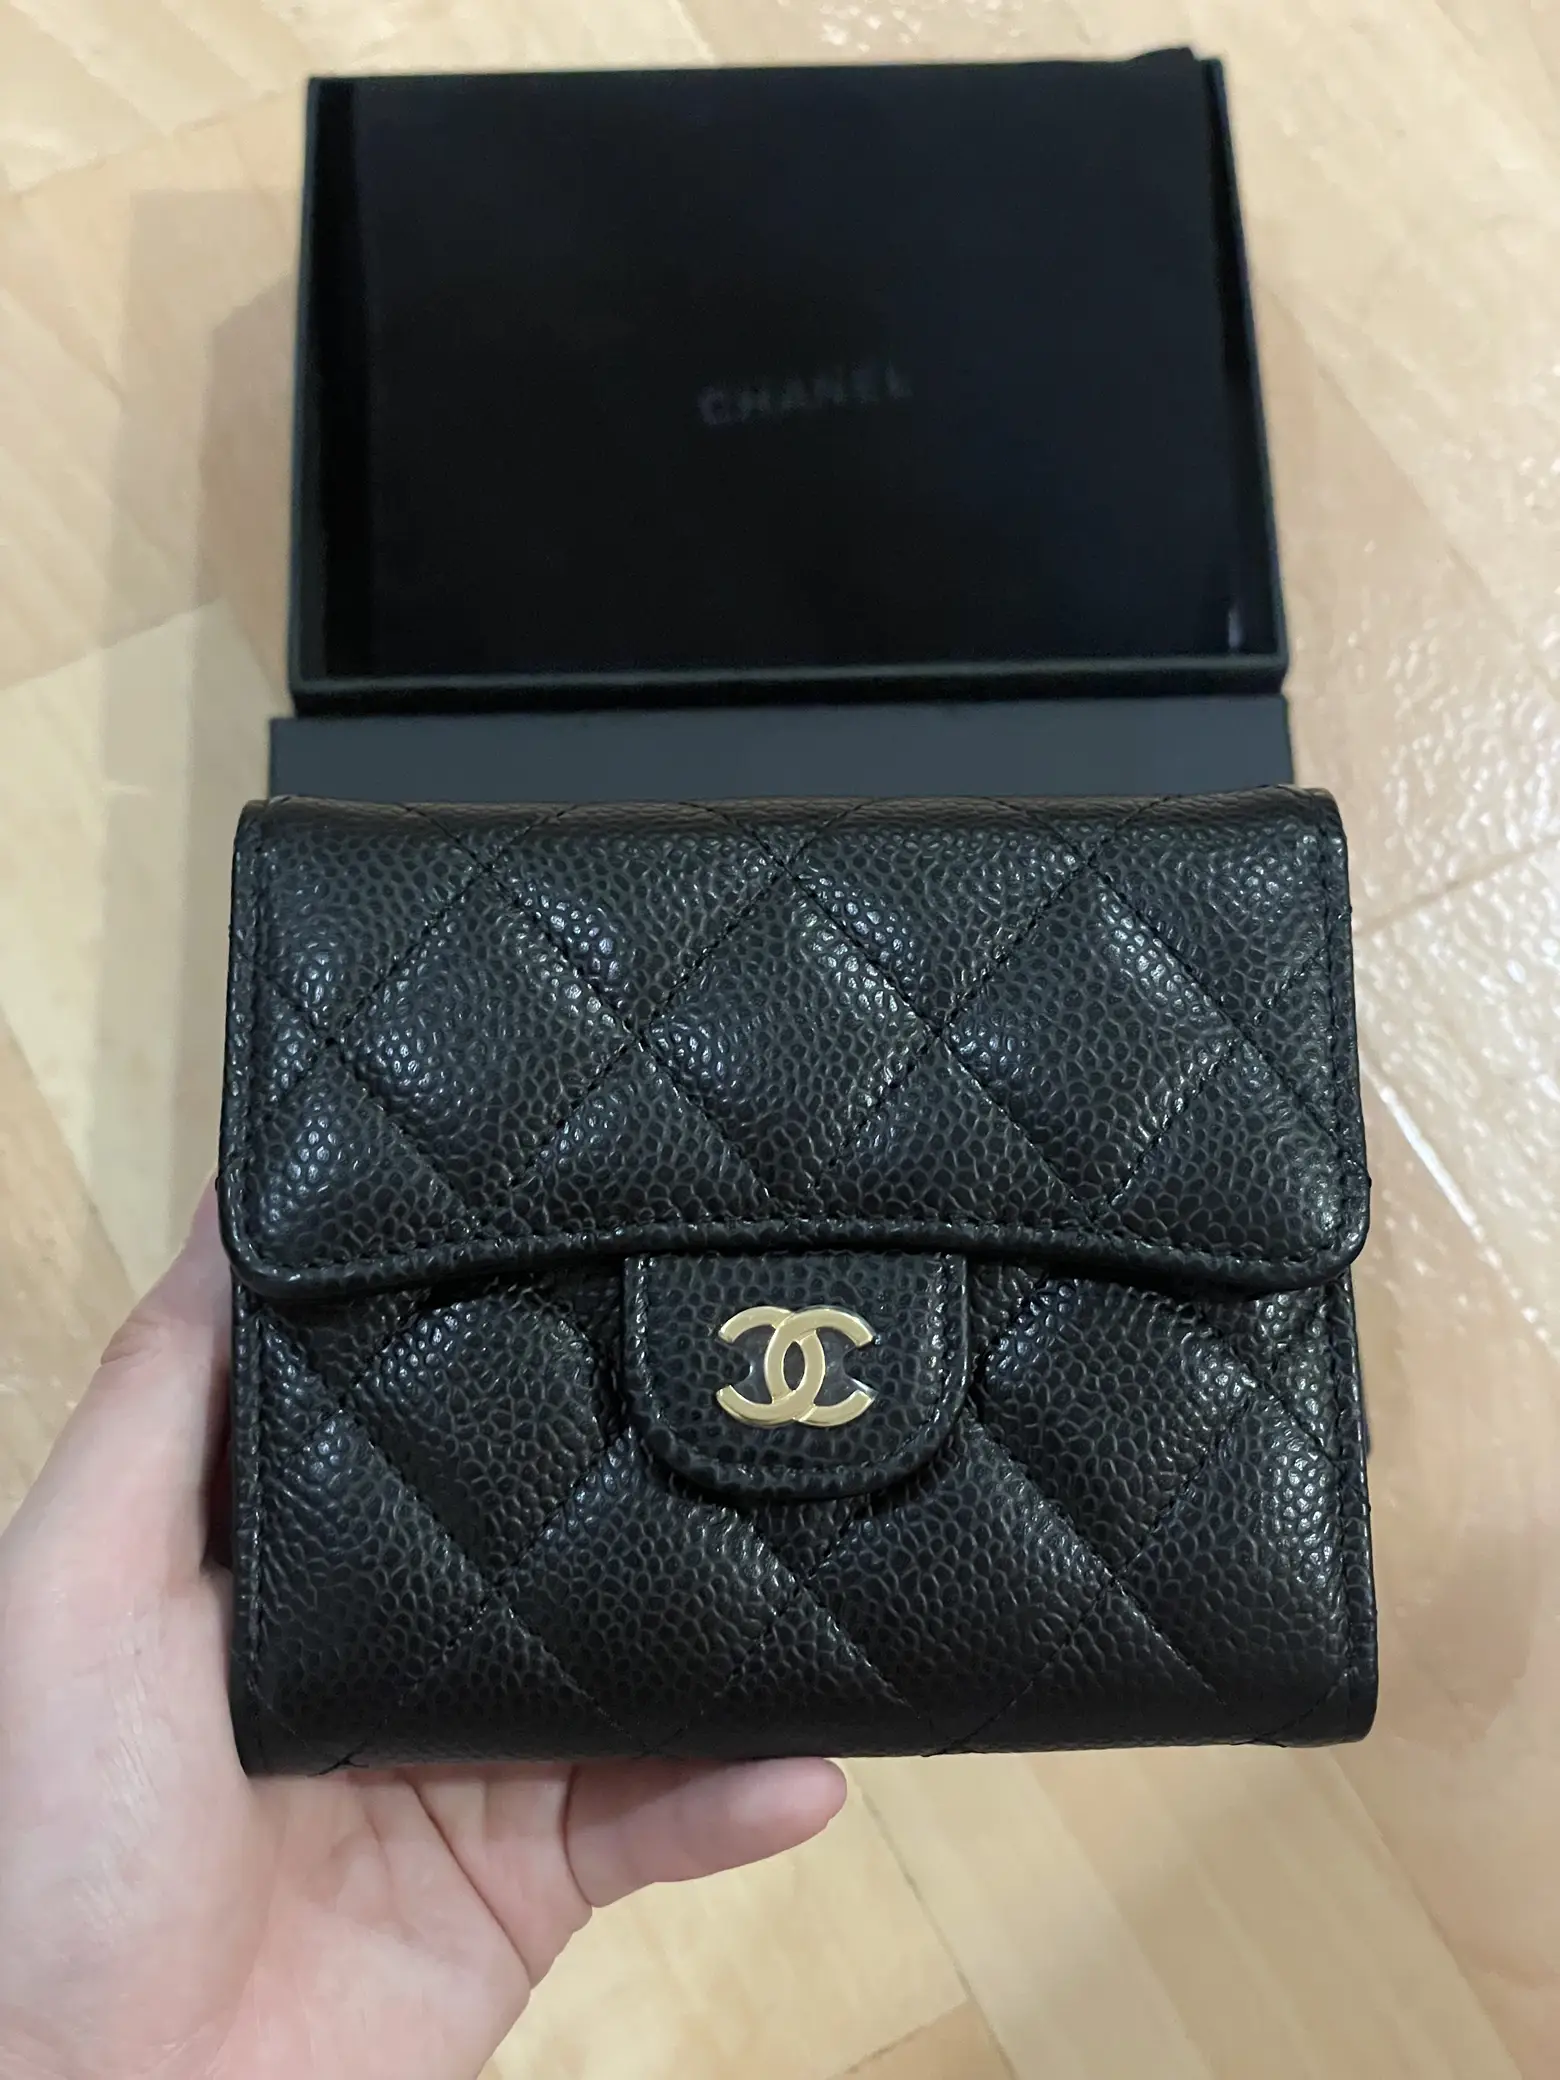 CHANEL CLASSIC TRIFOLD WALLET REVIEW, Gallery posted by Karin Dennisha